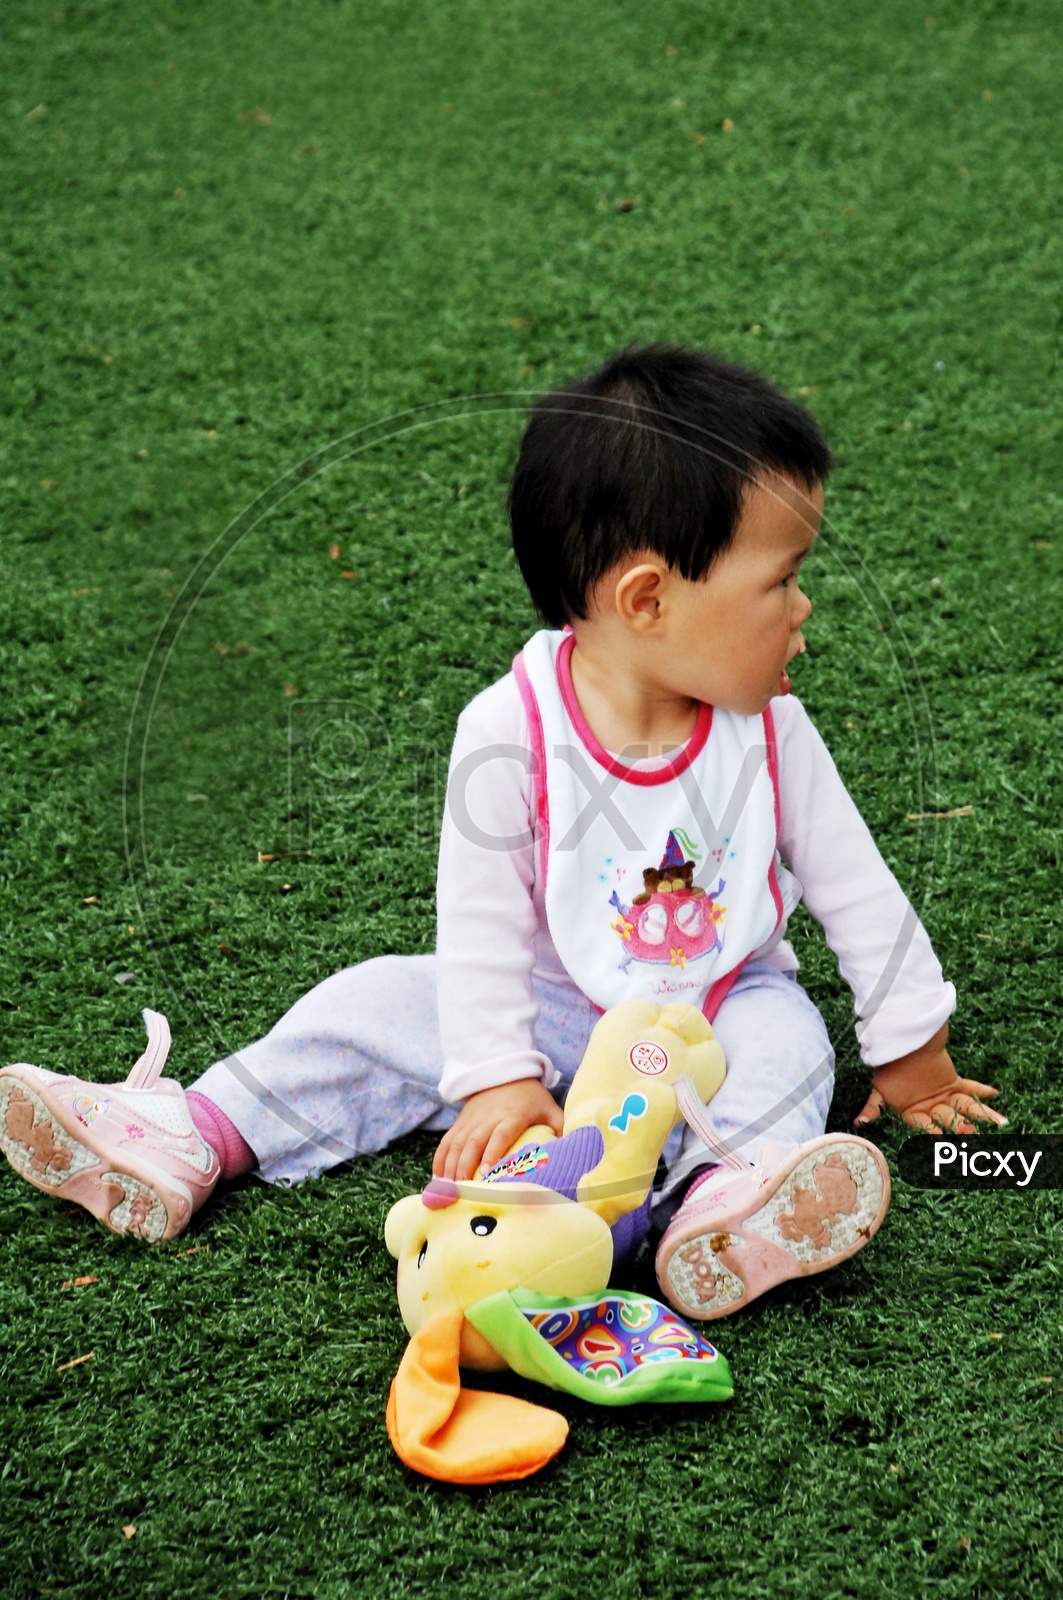 Toddler on the lawn with a toy